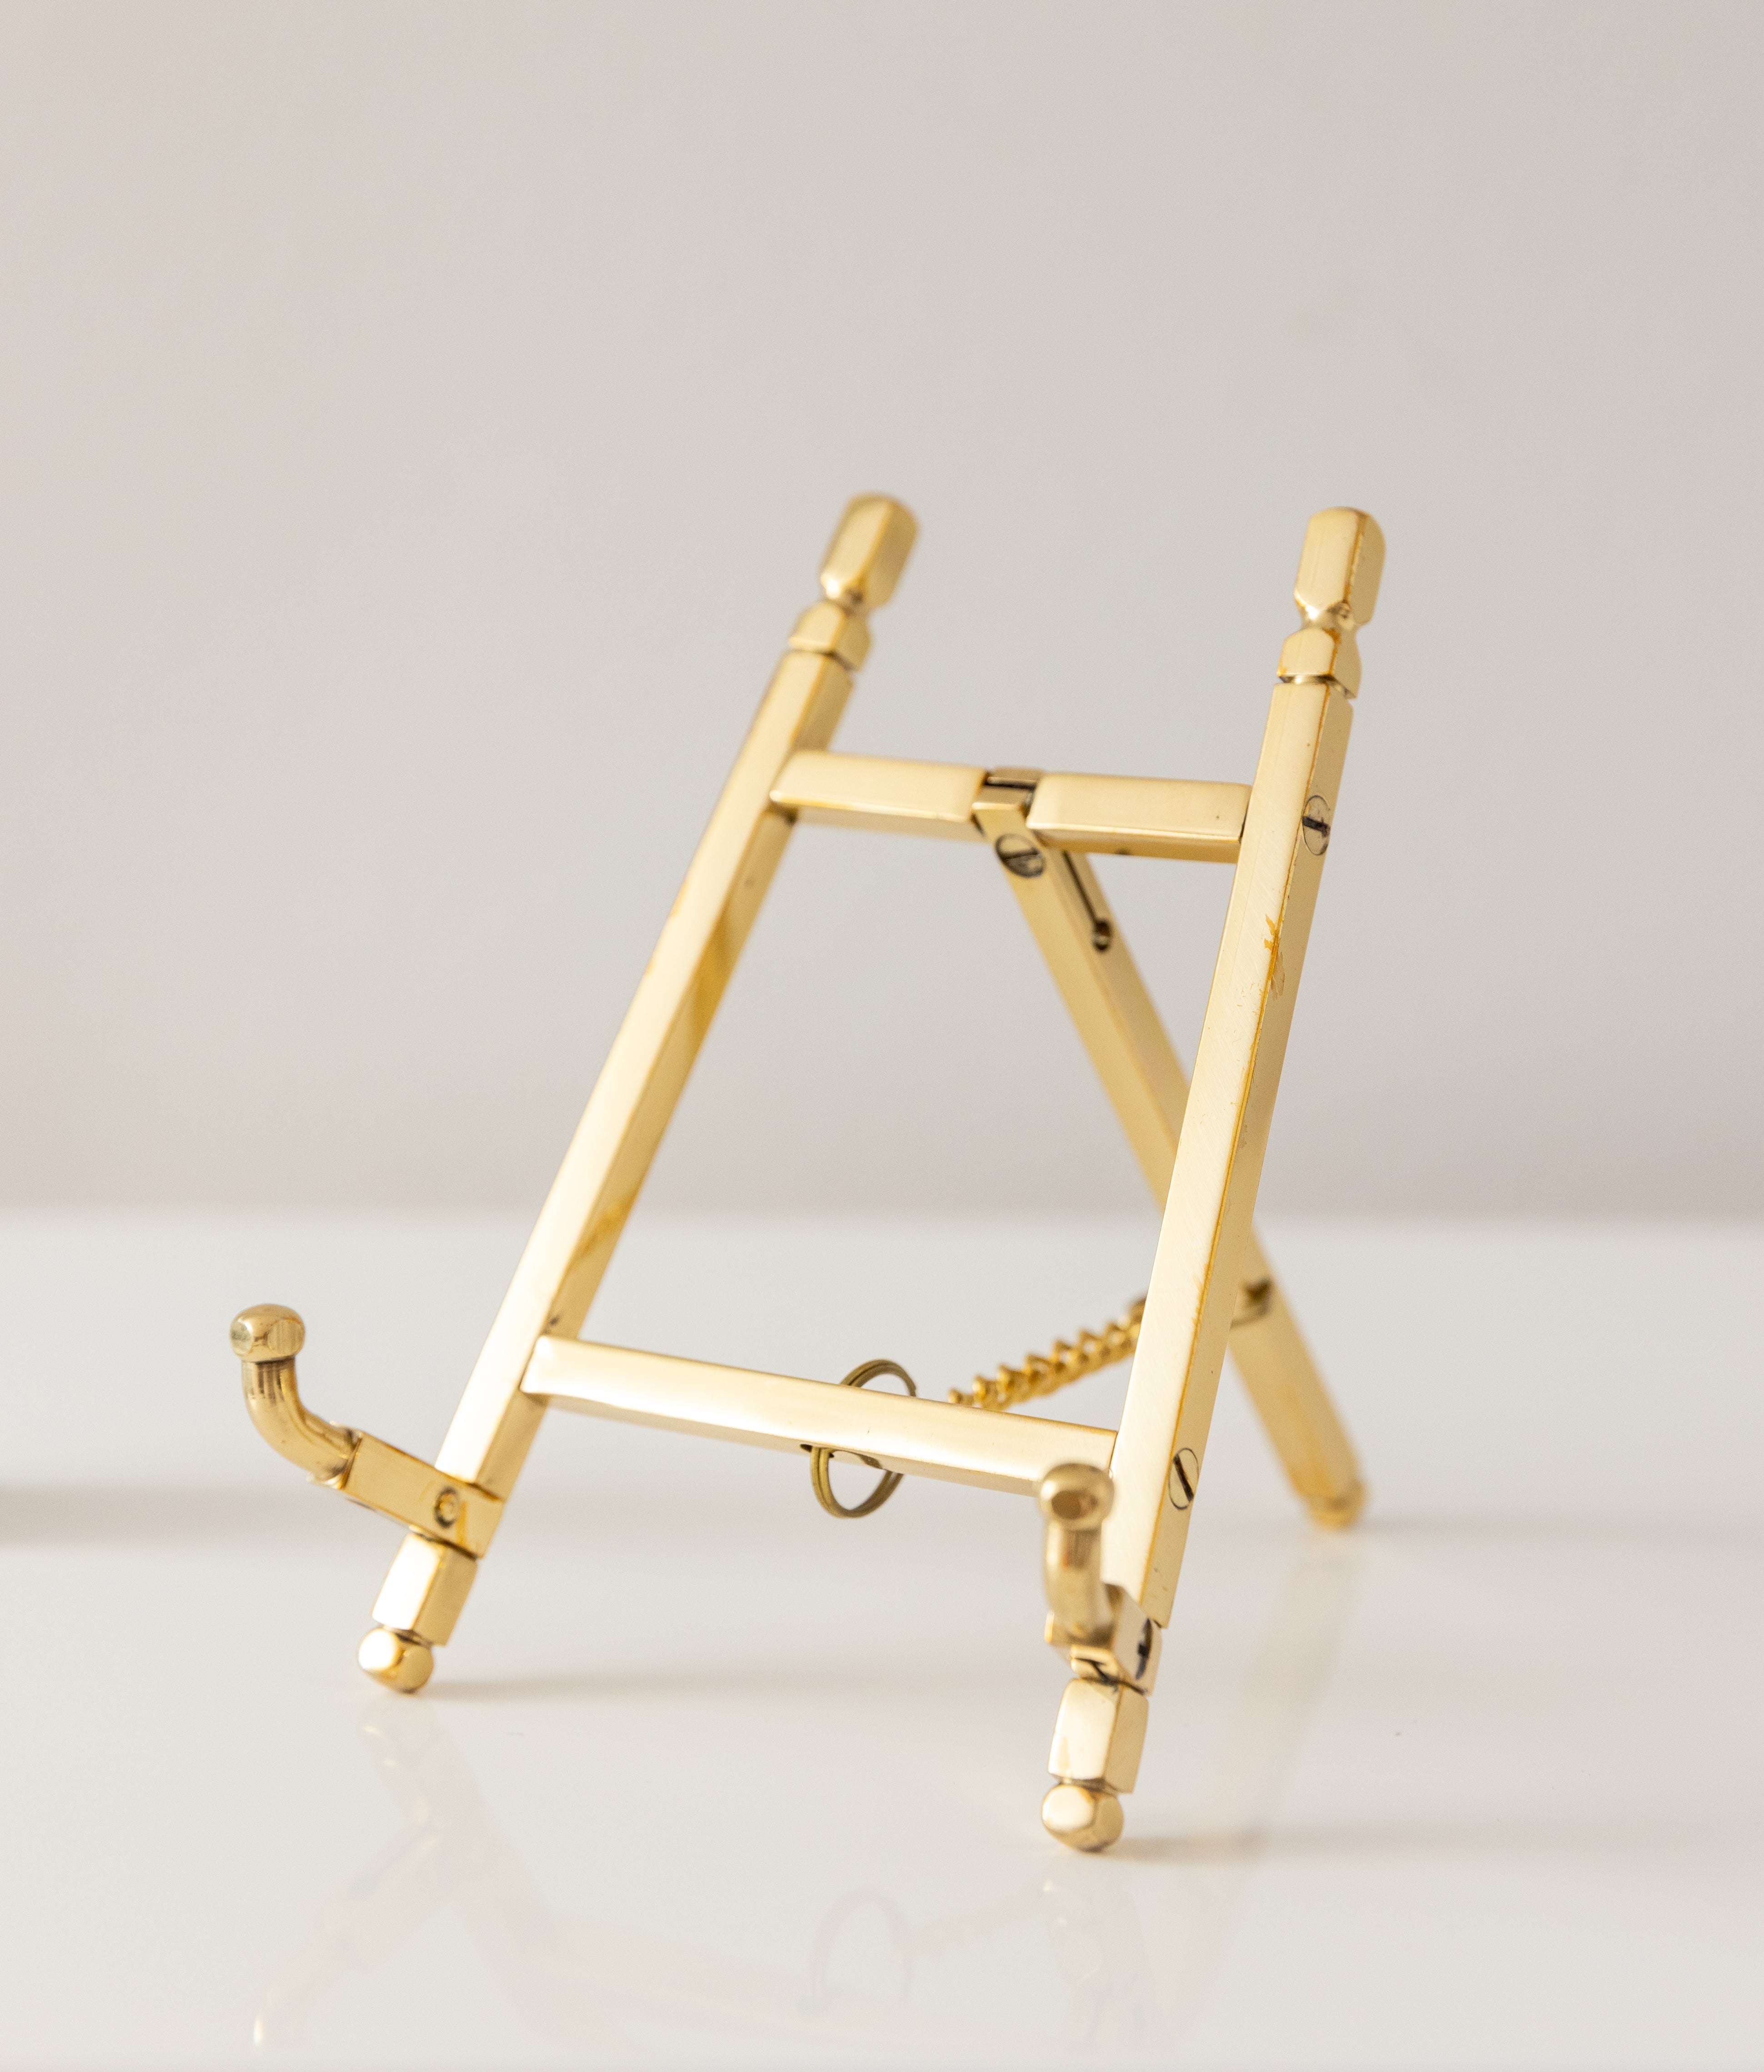 The Brass Easel